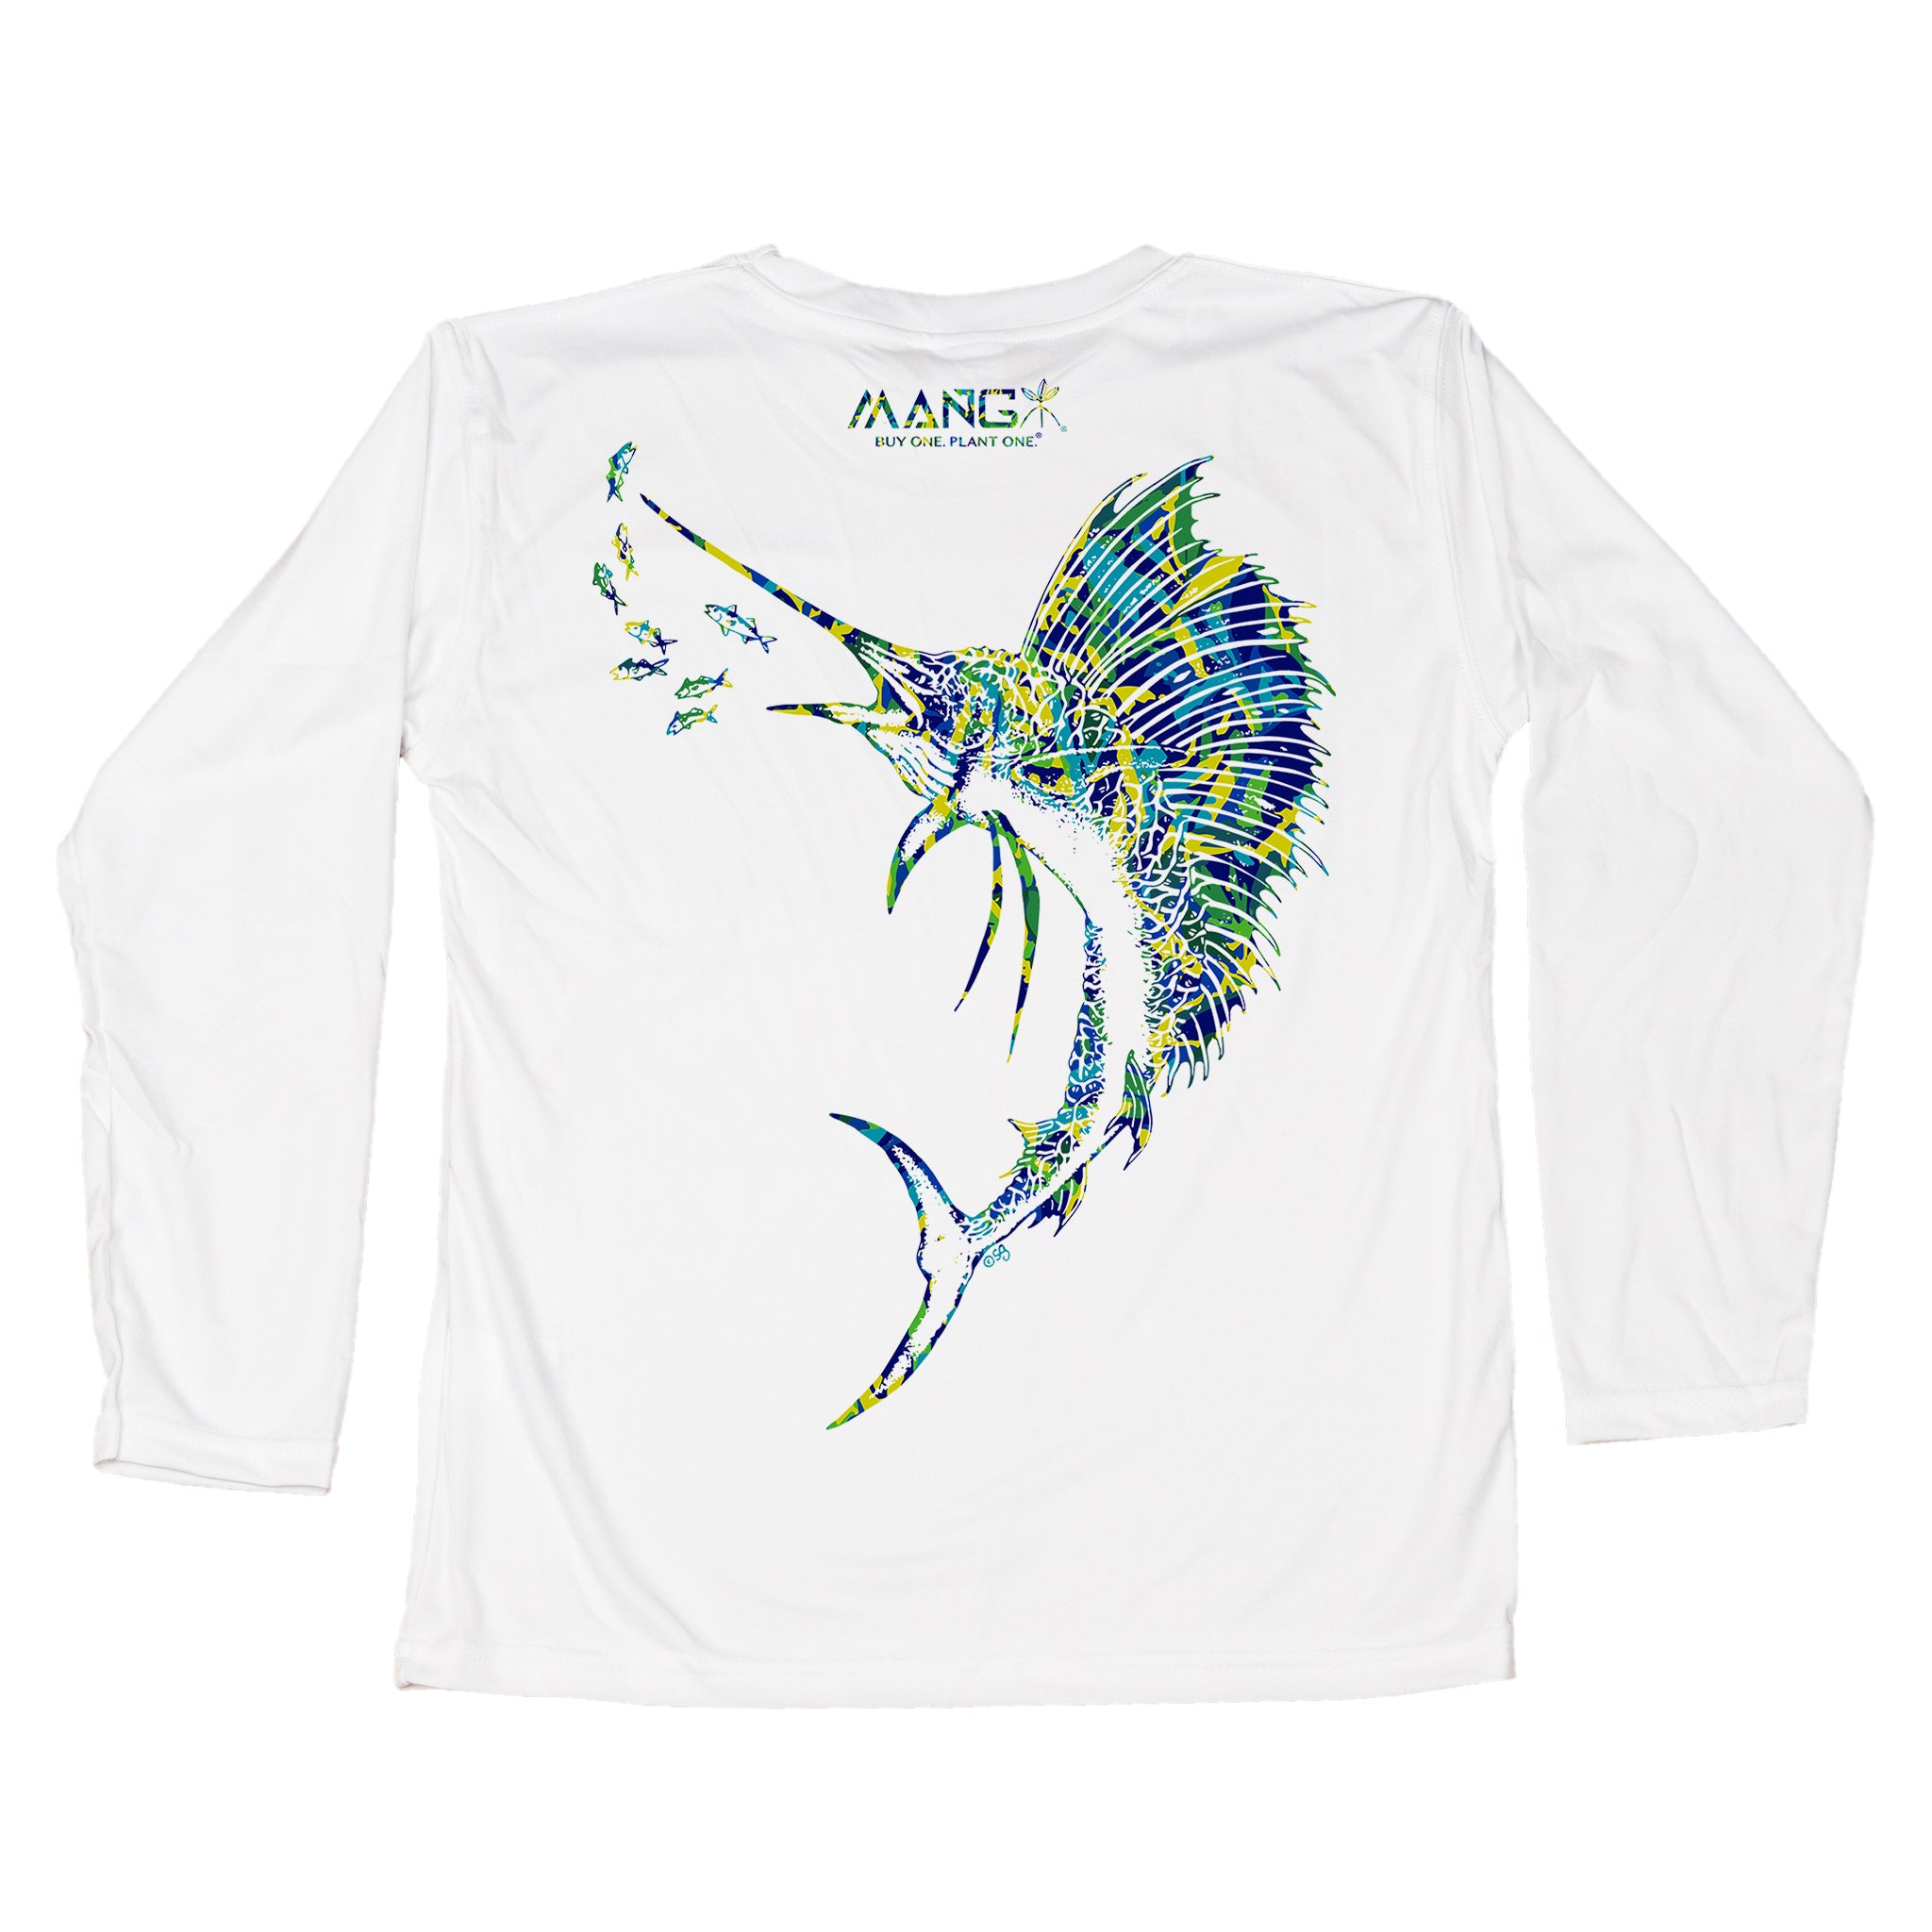 MANG Sailfish Blue Crush Mens's Long Sleeve Fishing Performance Shirt, Size S in White, Odor Resistant, Quick Dry, 100% Polyester